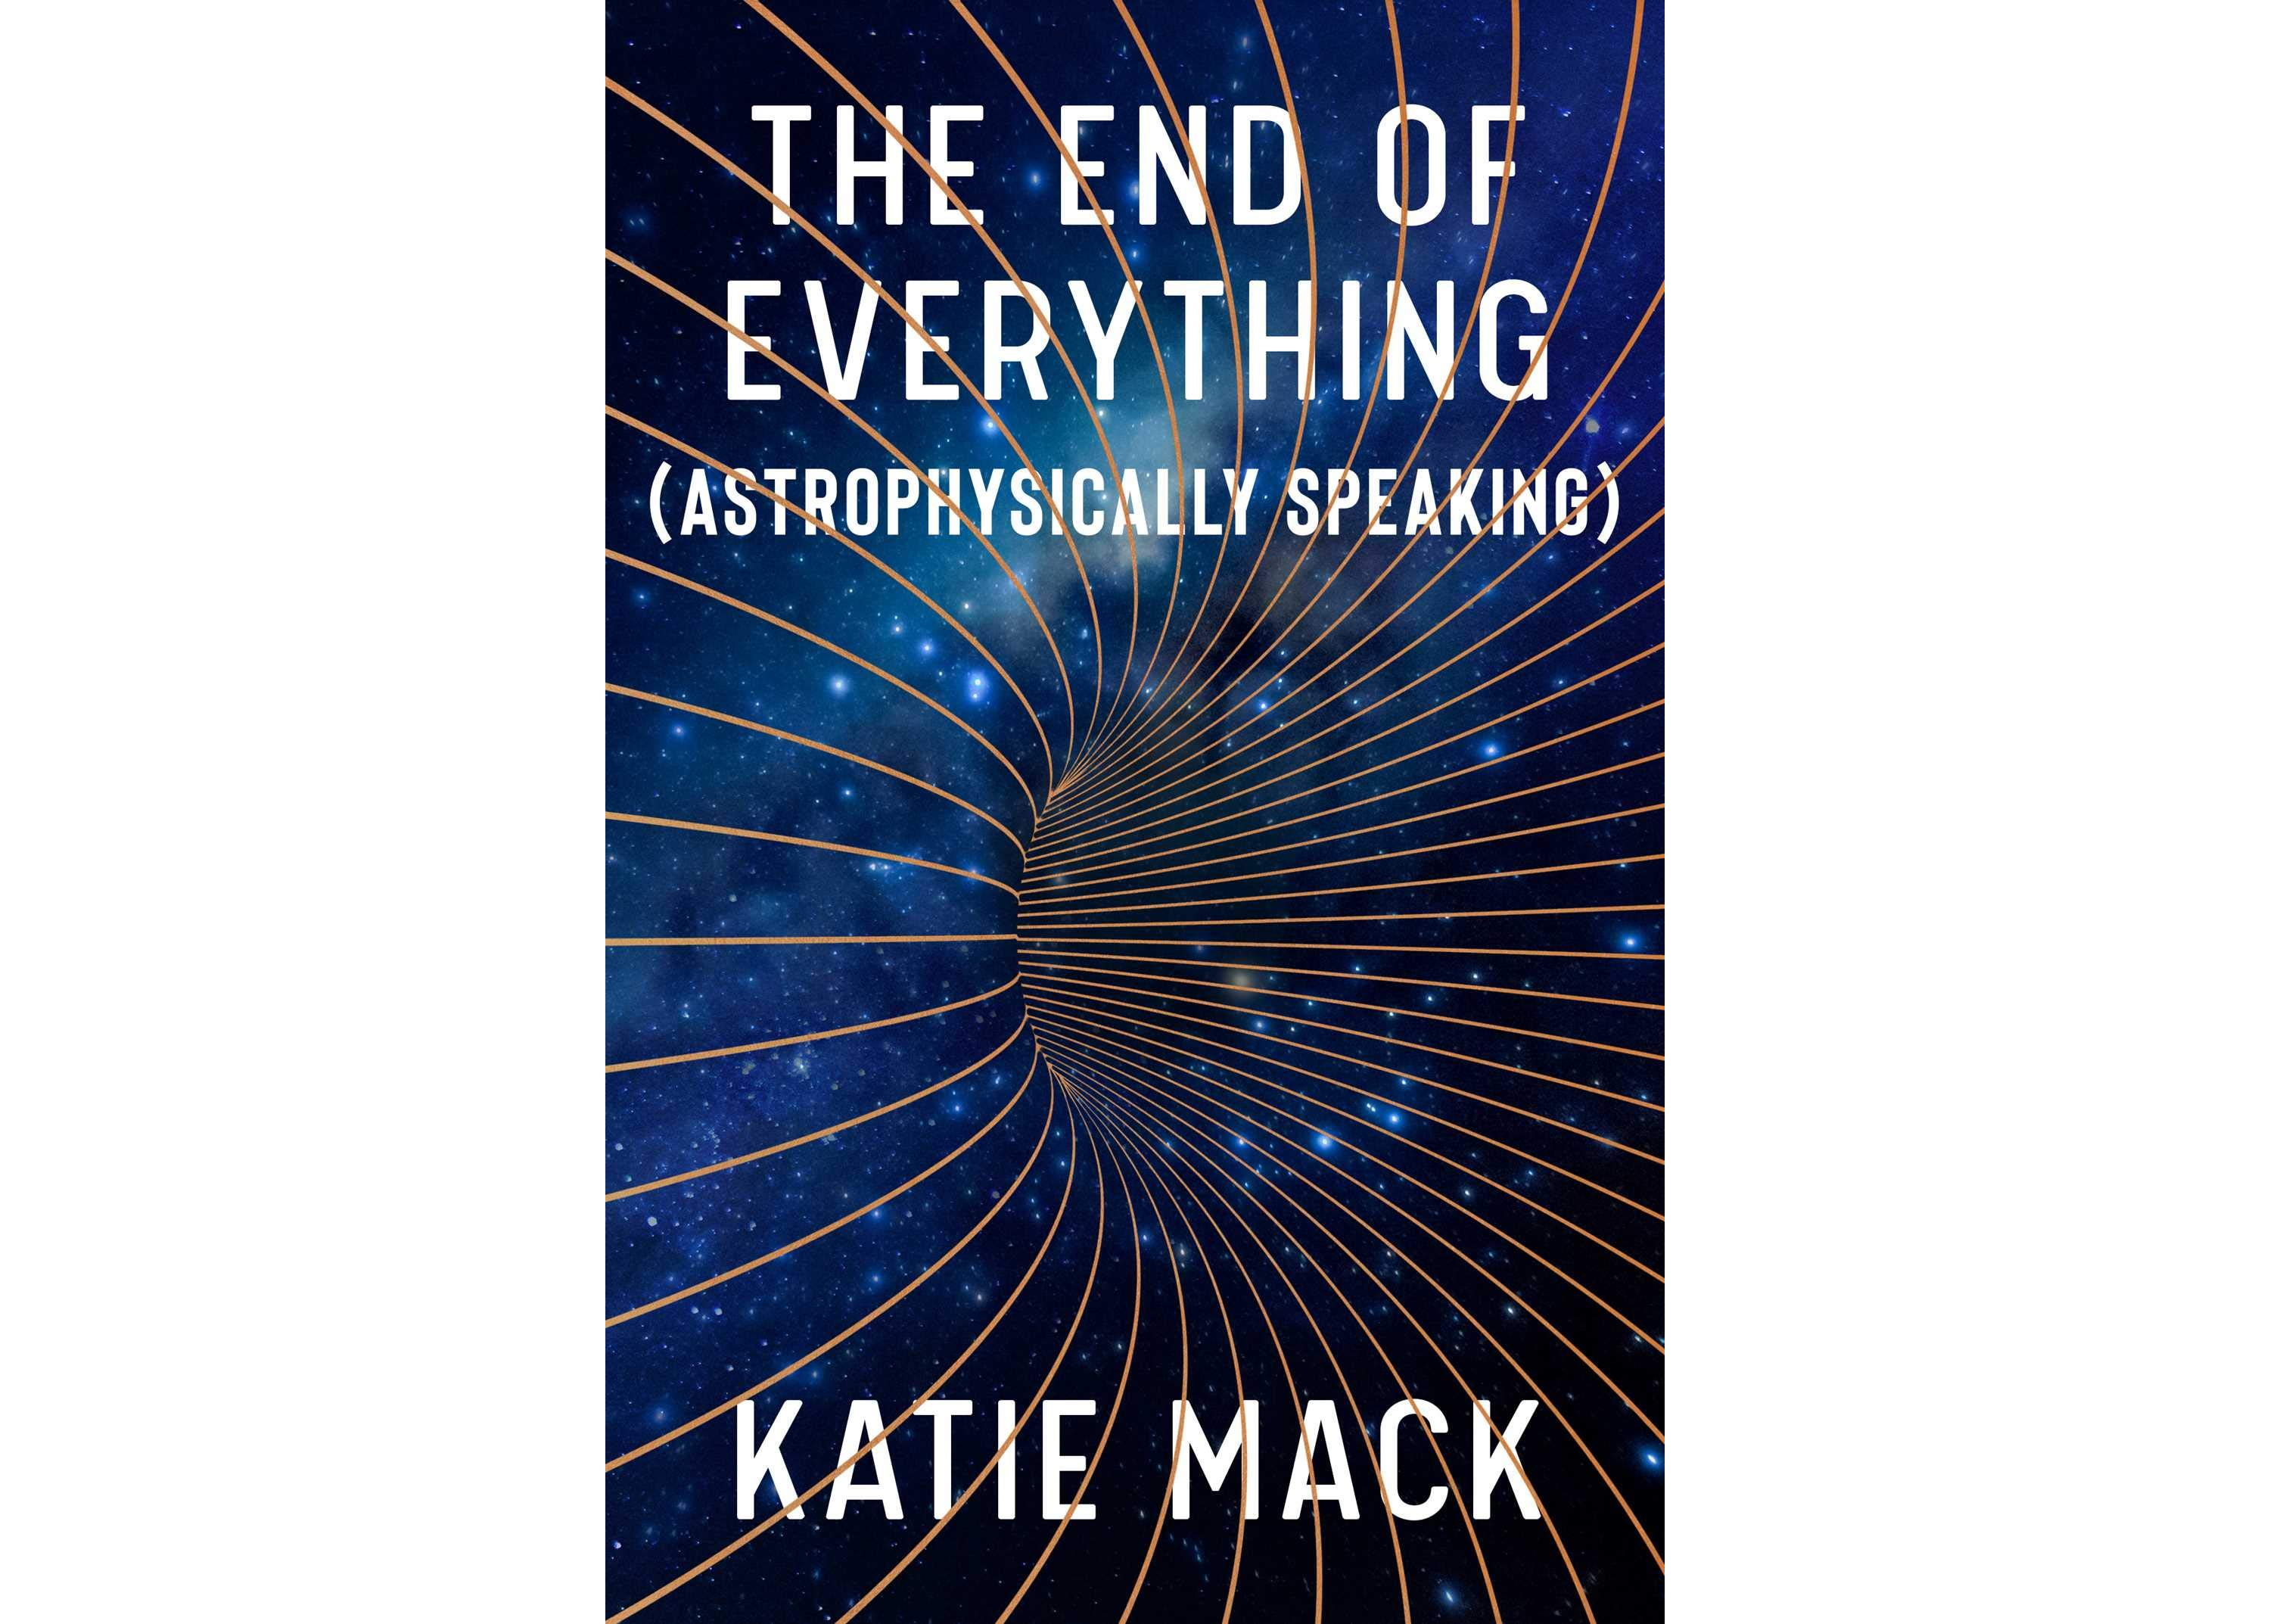 The End of Everything by Katie Mack